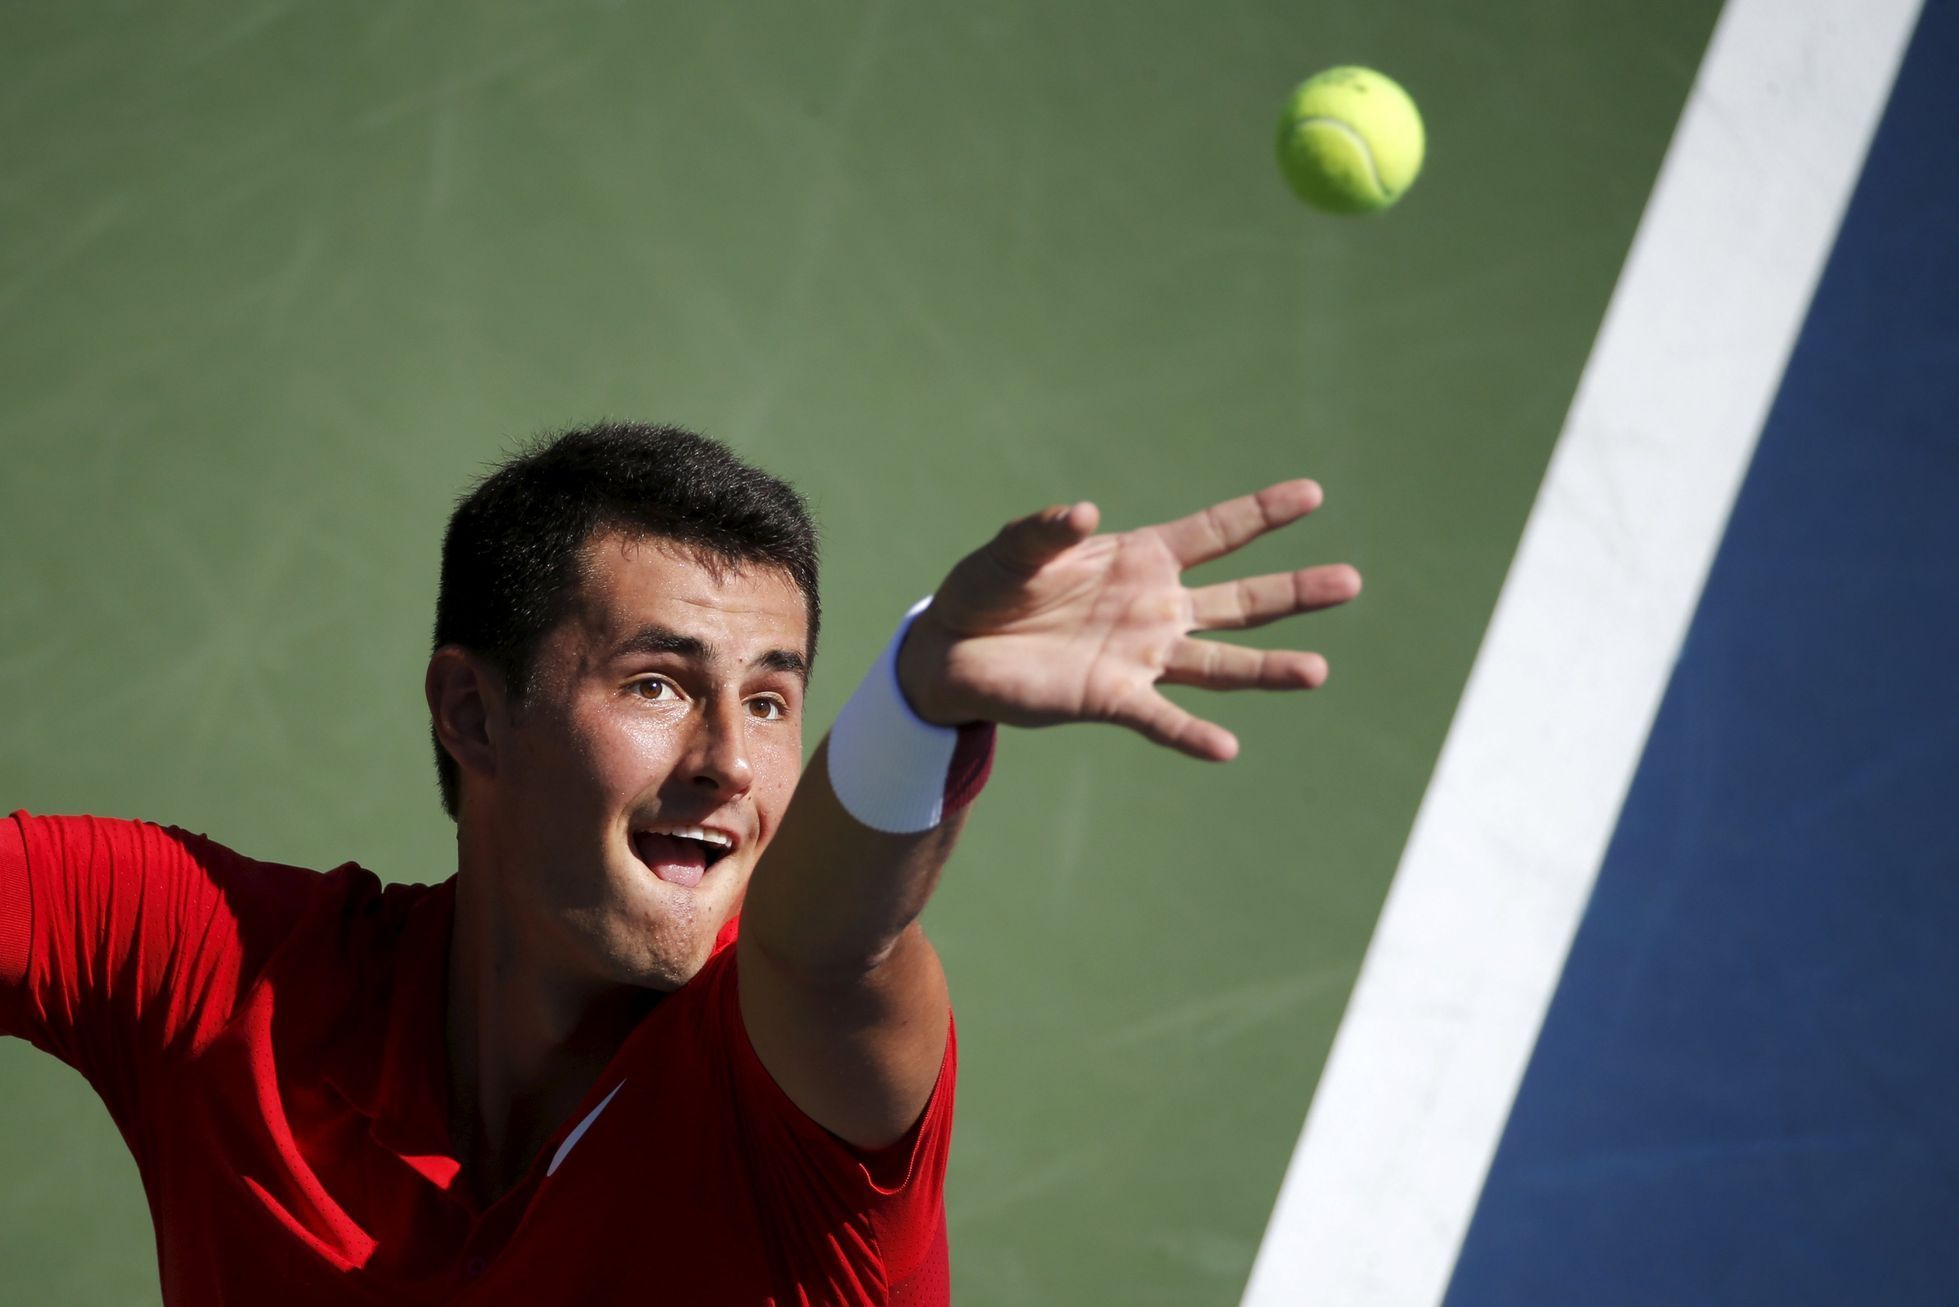 Tomic of Australia serves to Gasquet of France during their match at the U.S. Open Championships tennis tournament in New York